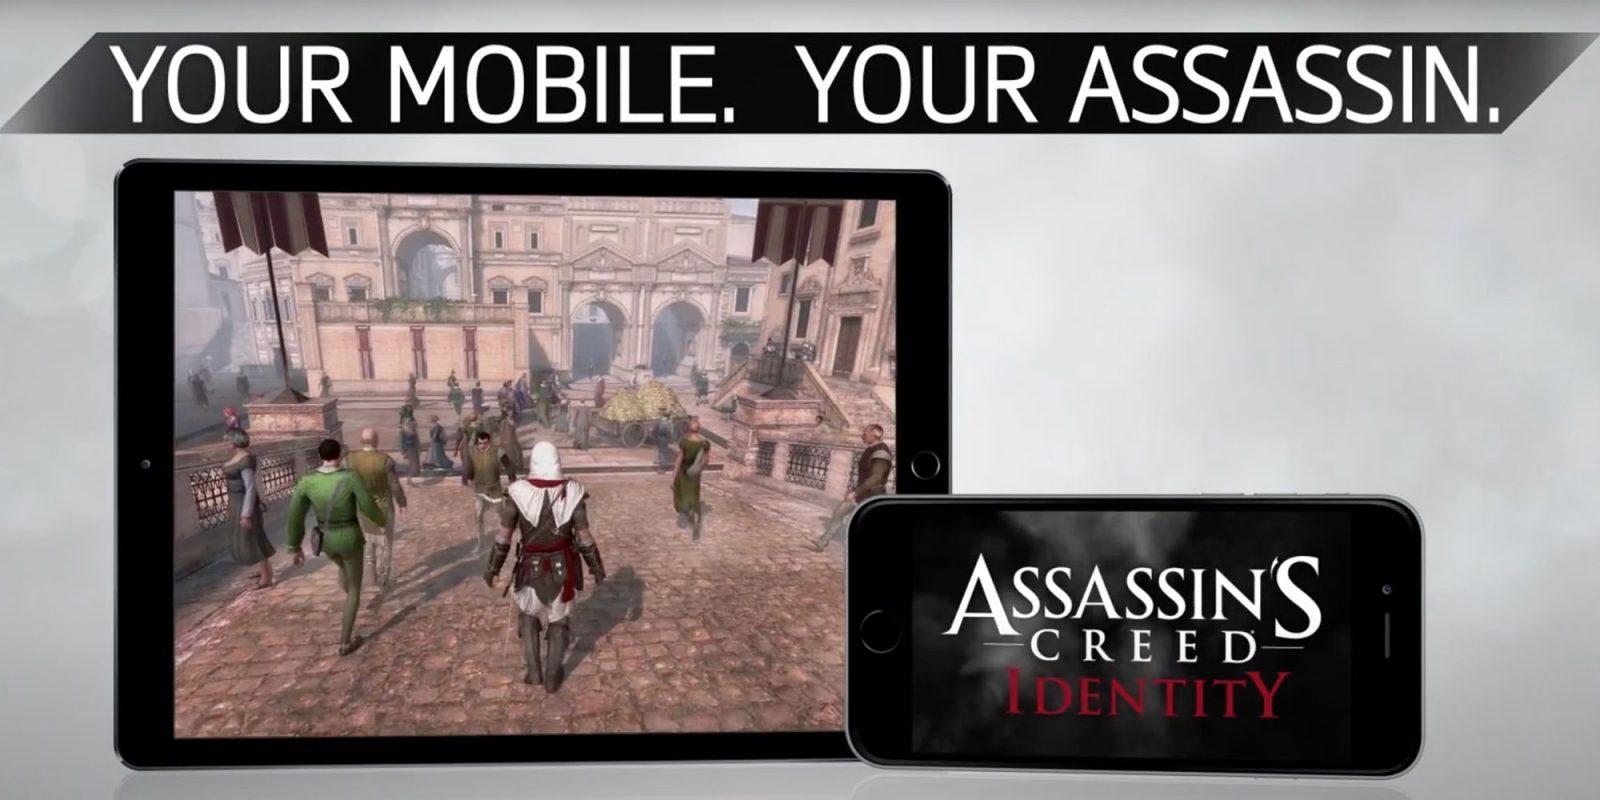 Assassin's Creed Identity removed from App Store in China